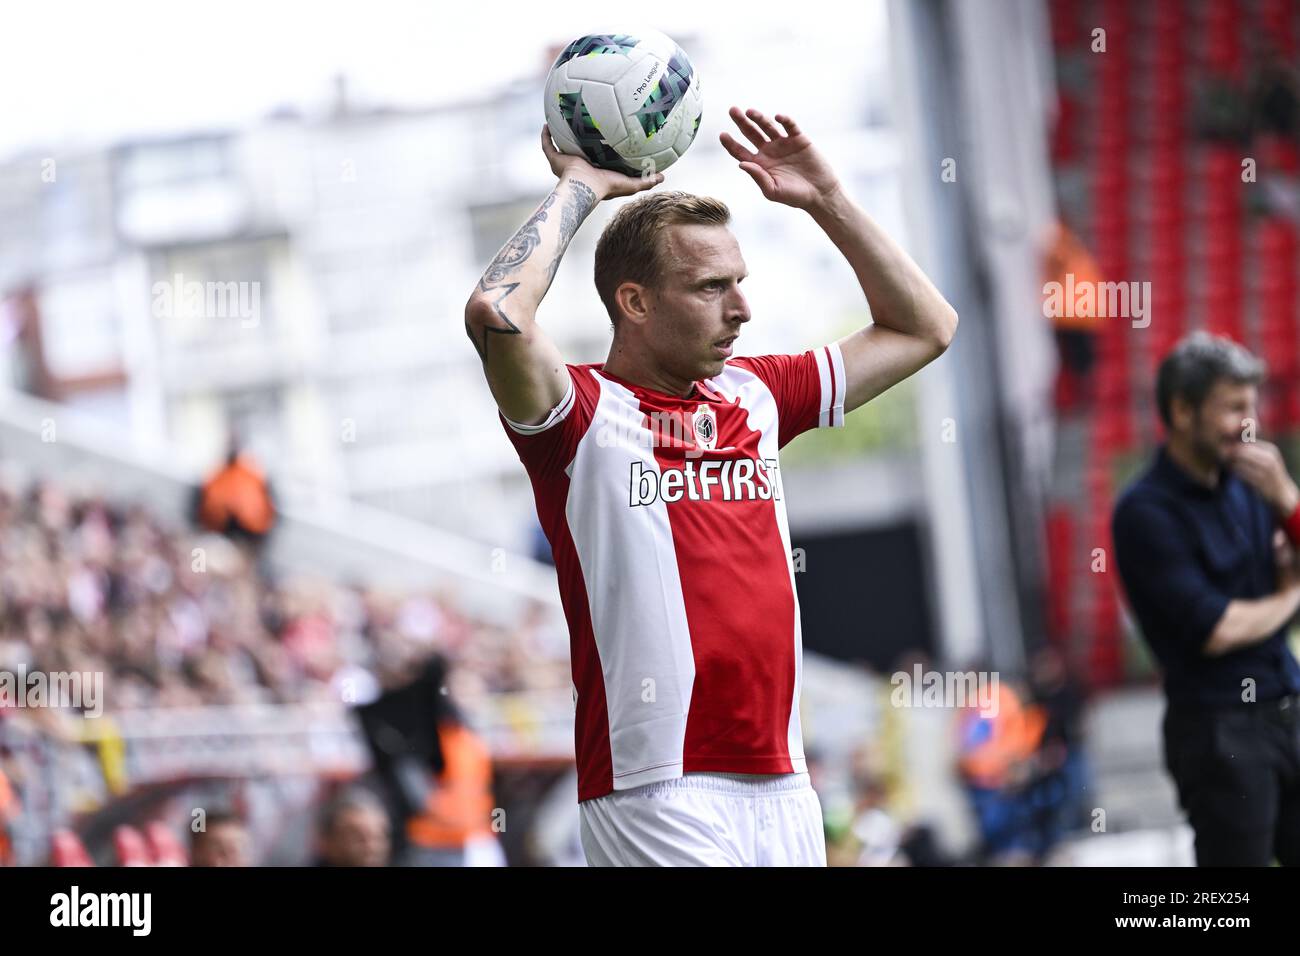 Antwerp, Belgium. 30th July, 2023. Antwerp's Ritchie De Laet pictured in  action during a soccer match between Royal Antwerp FC and Cercle Brugge,  Sunday 30 July 2023 in Antwerp, on day 1/30